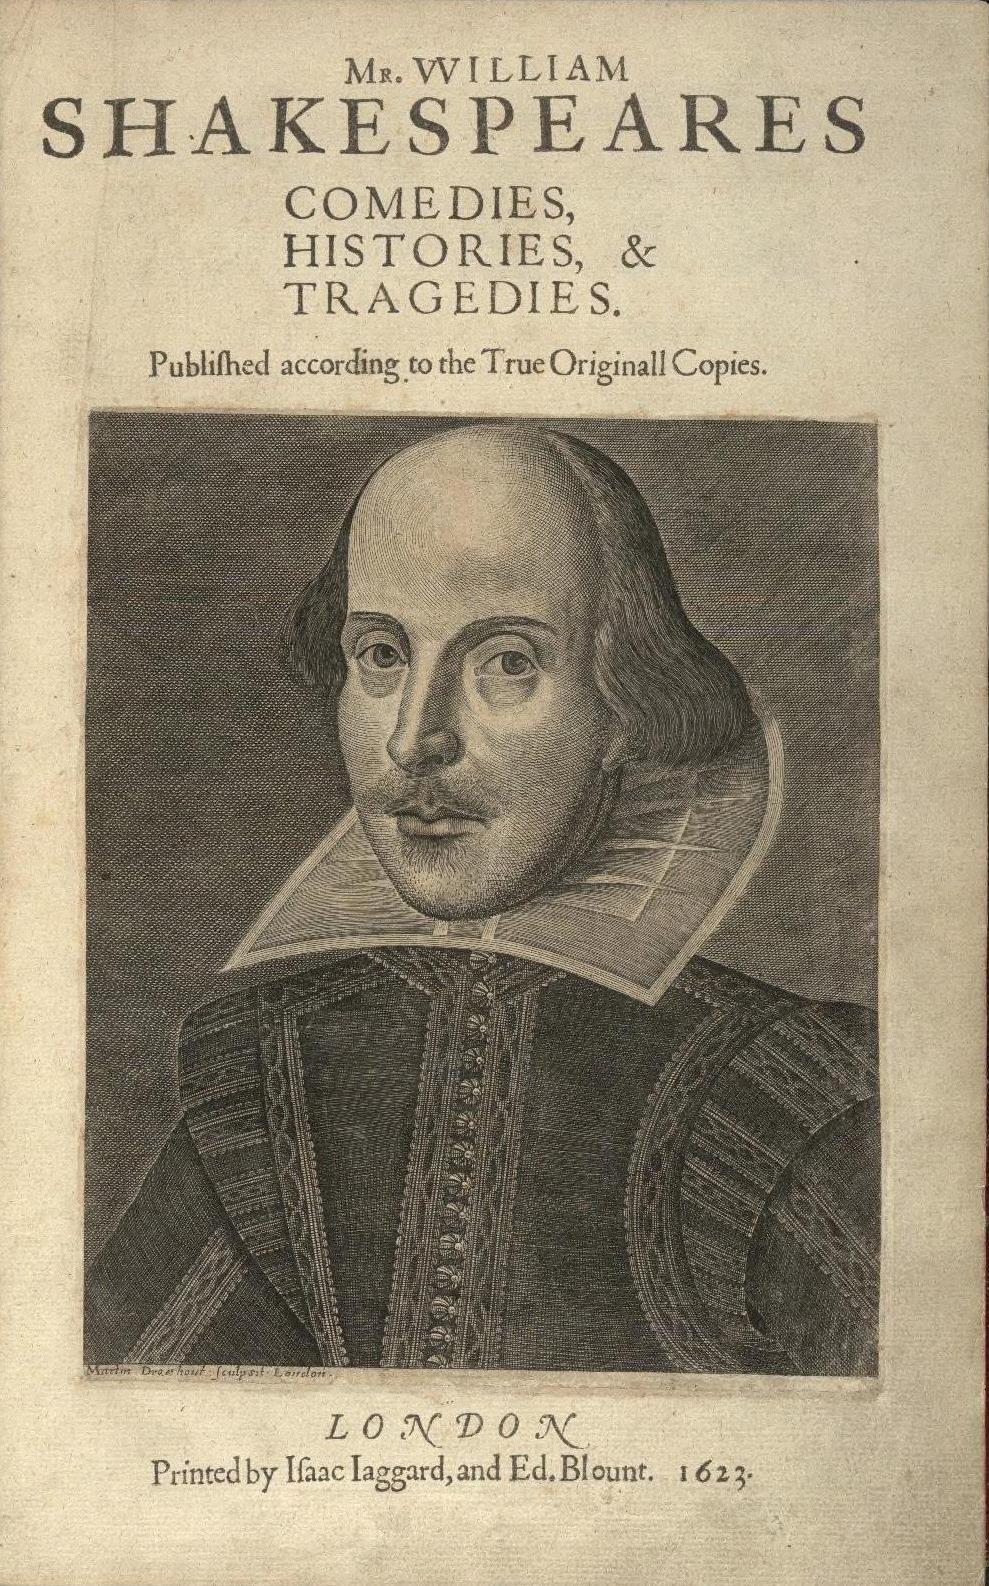 "First Folio" contained multiple errors--for example, there was no indication where Acts or Scenes began or ended.